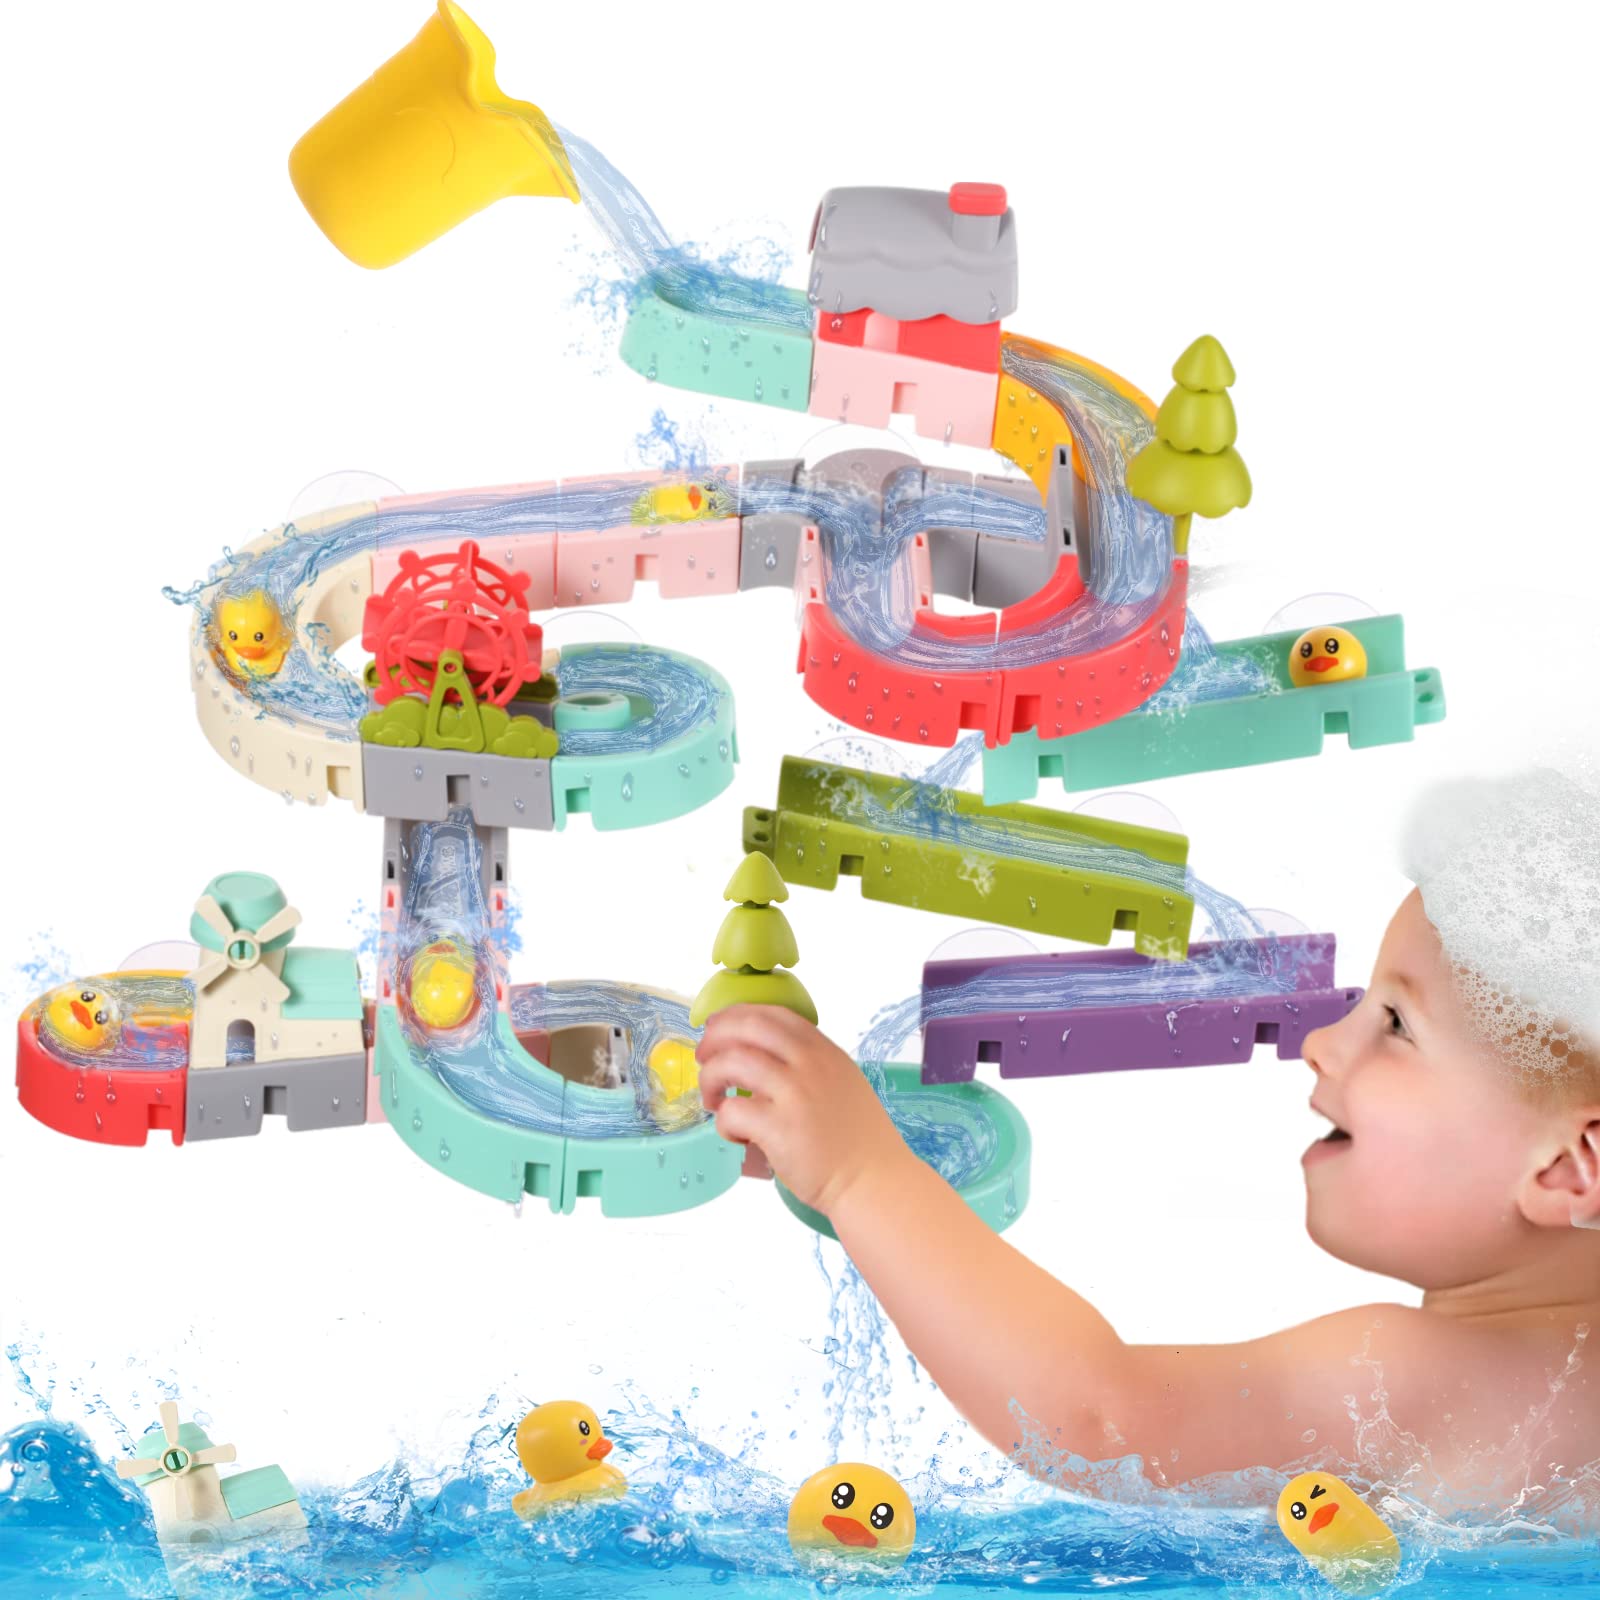 WELLVO 62PCS Bath Toys for Kids Ages 4-8 Duck Slide Bath Toys Wall Bathtub Toy Slide Bath Time Toys for Toddlers 3 4 5 6 Years DIY Take Apart Tracks Set Shower Toys Birthday Gifts for Boys Girls